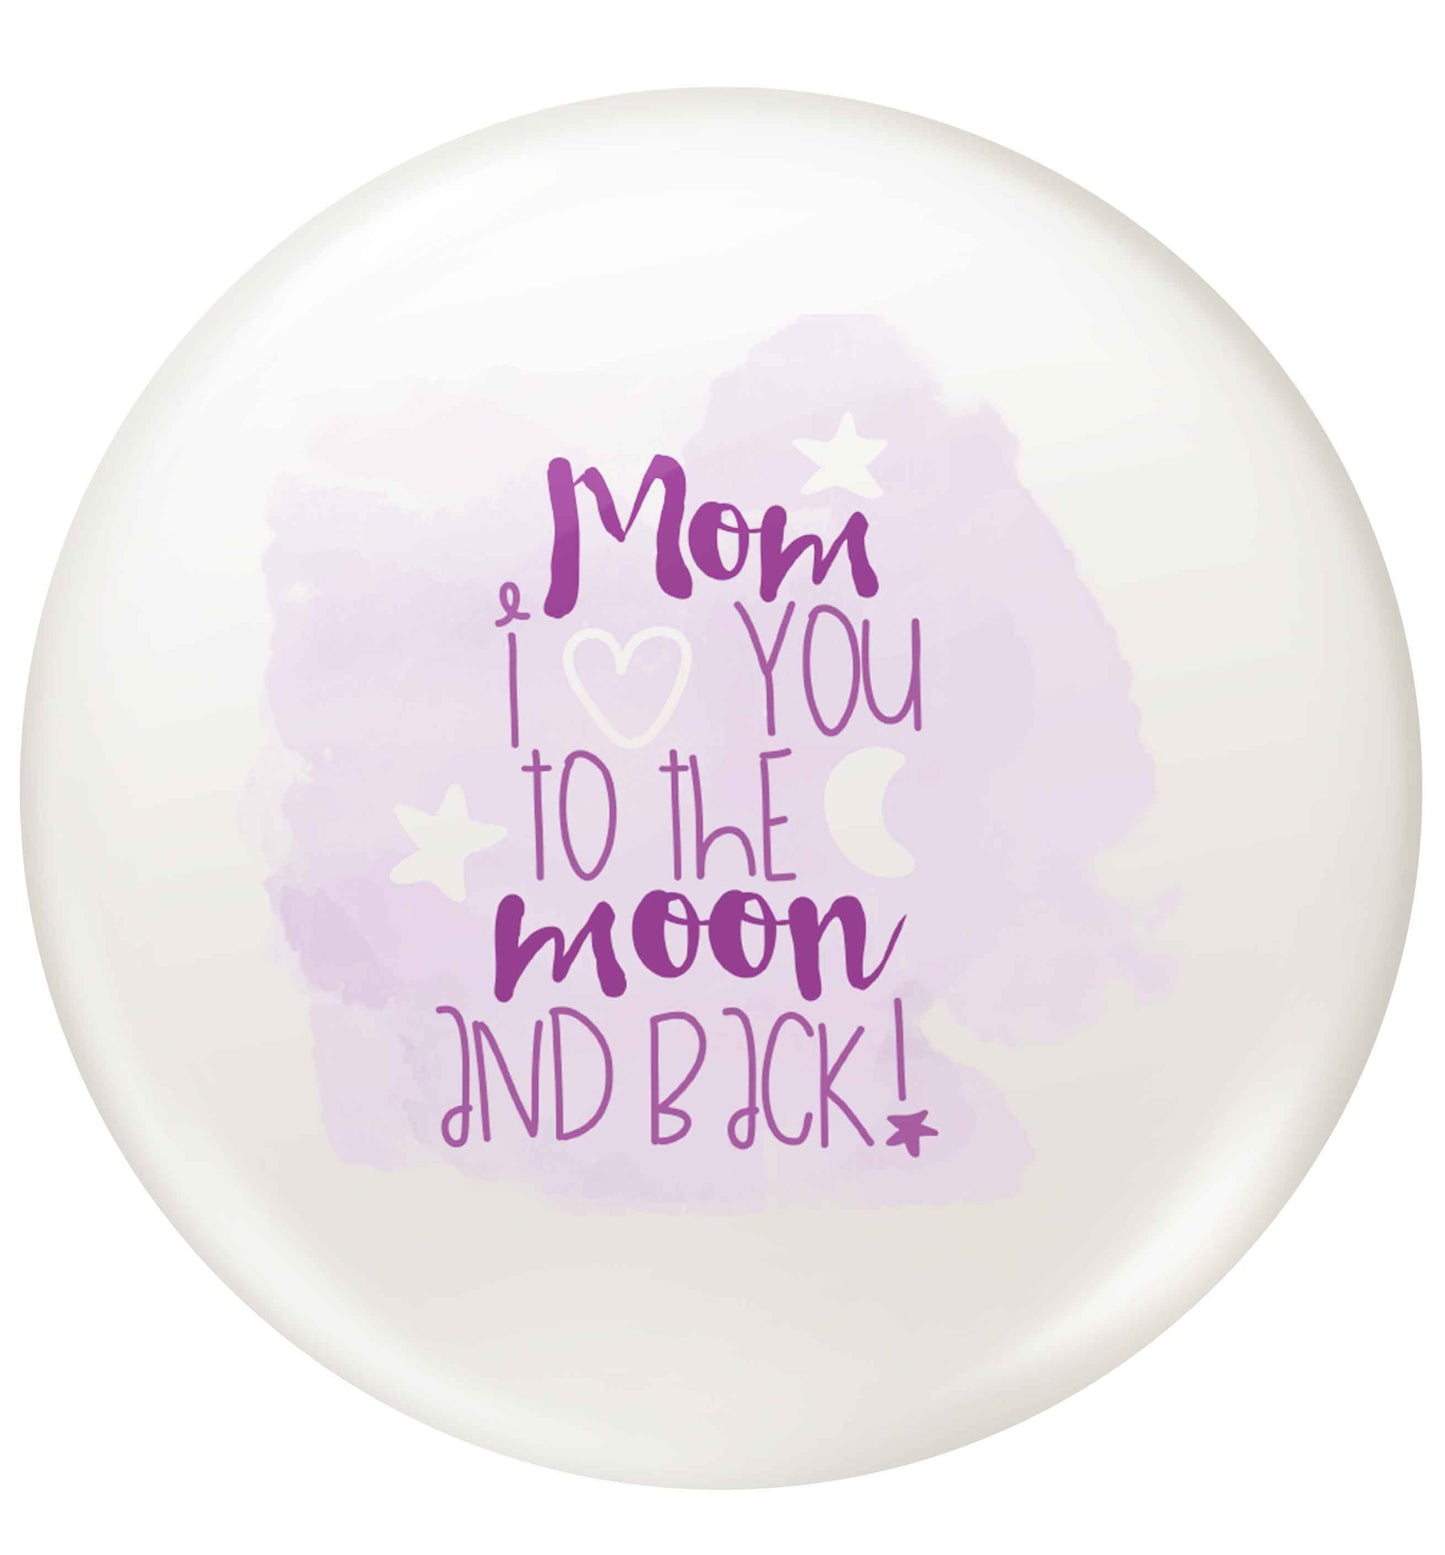 Mom I love you to the moon and back small 25mm Pin badge